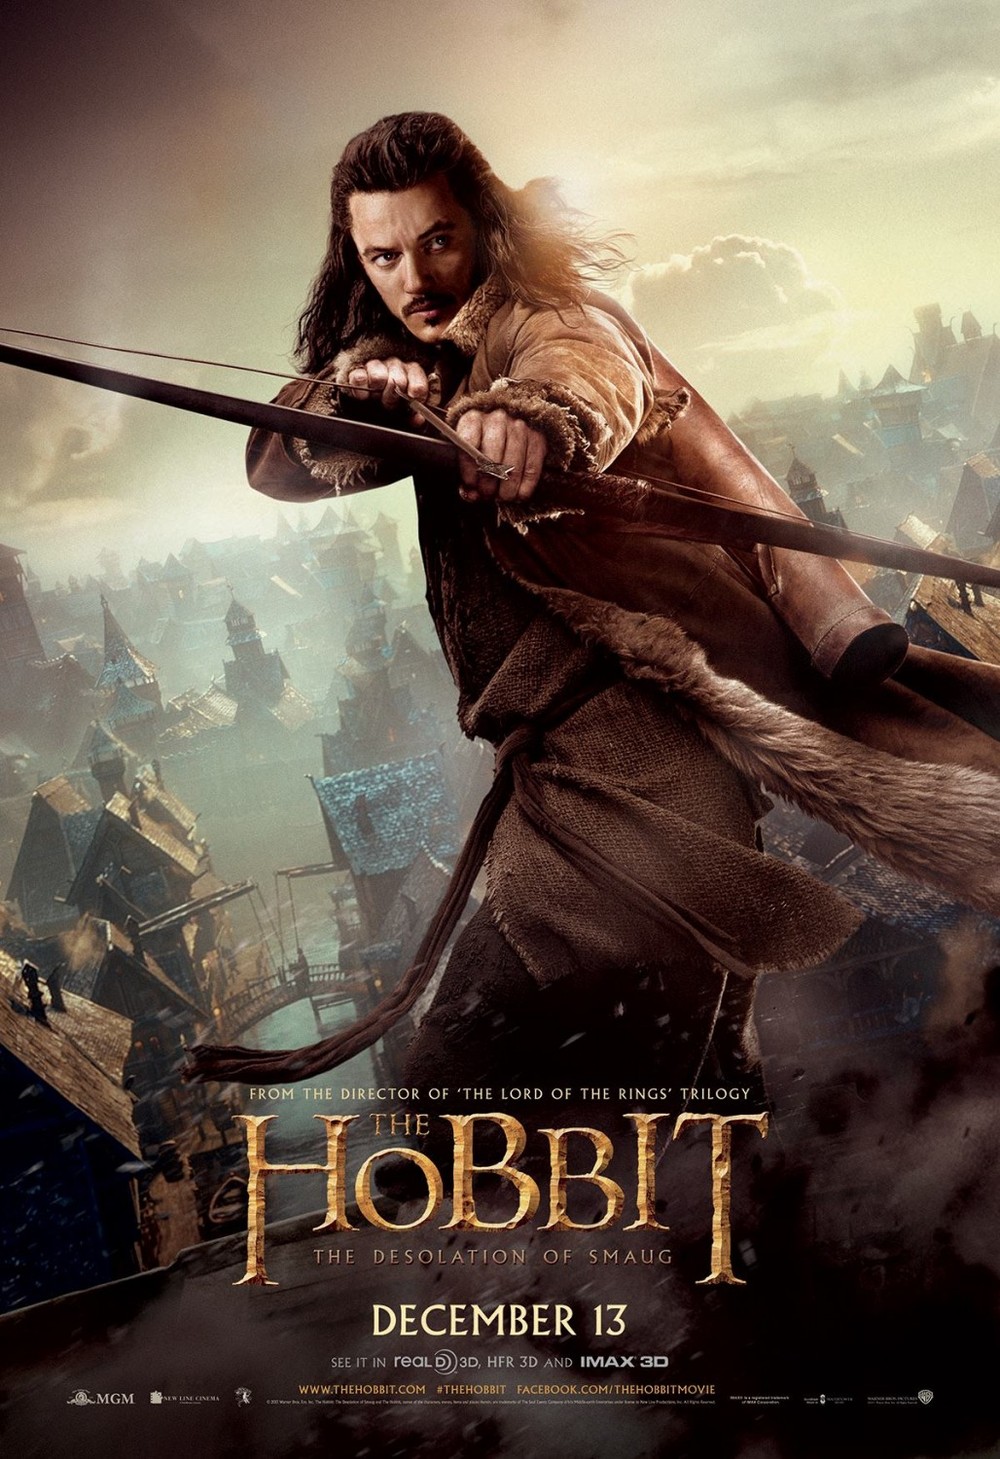 The Hobbit: The Desolation of Smaug DVD Release Date 